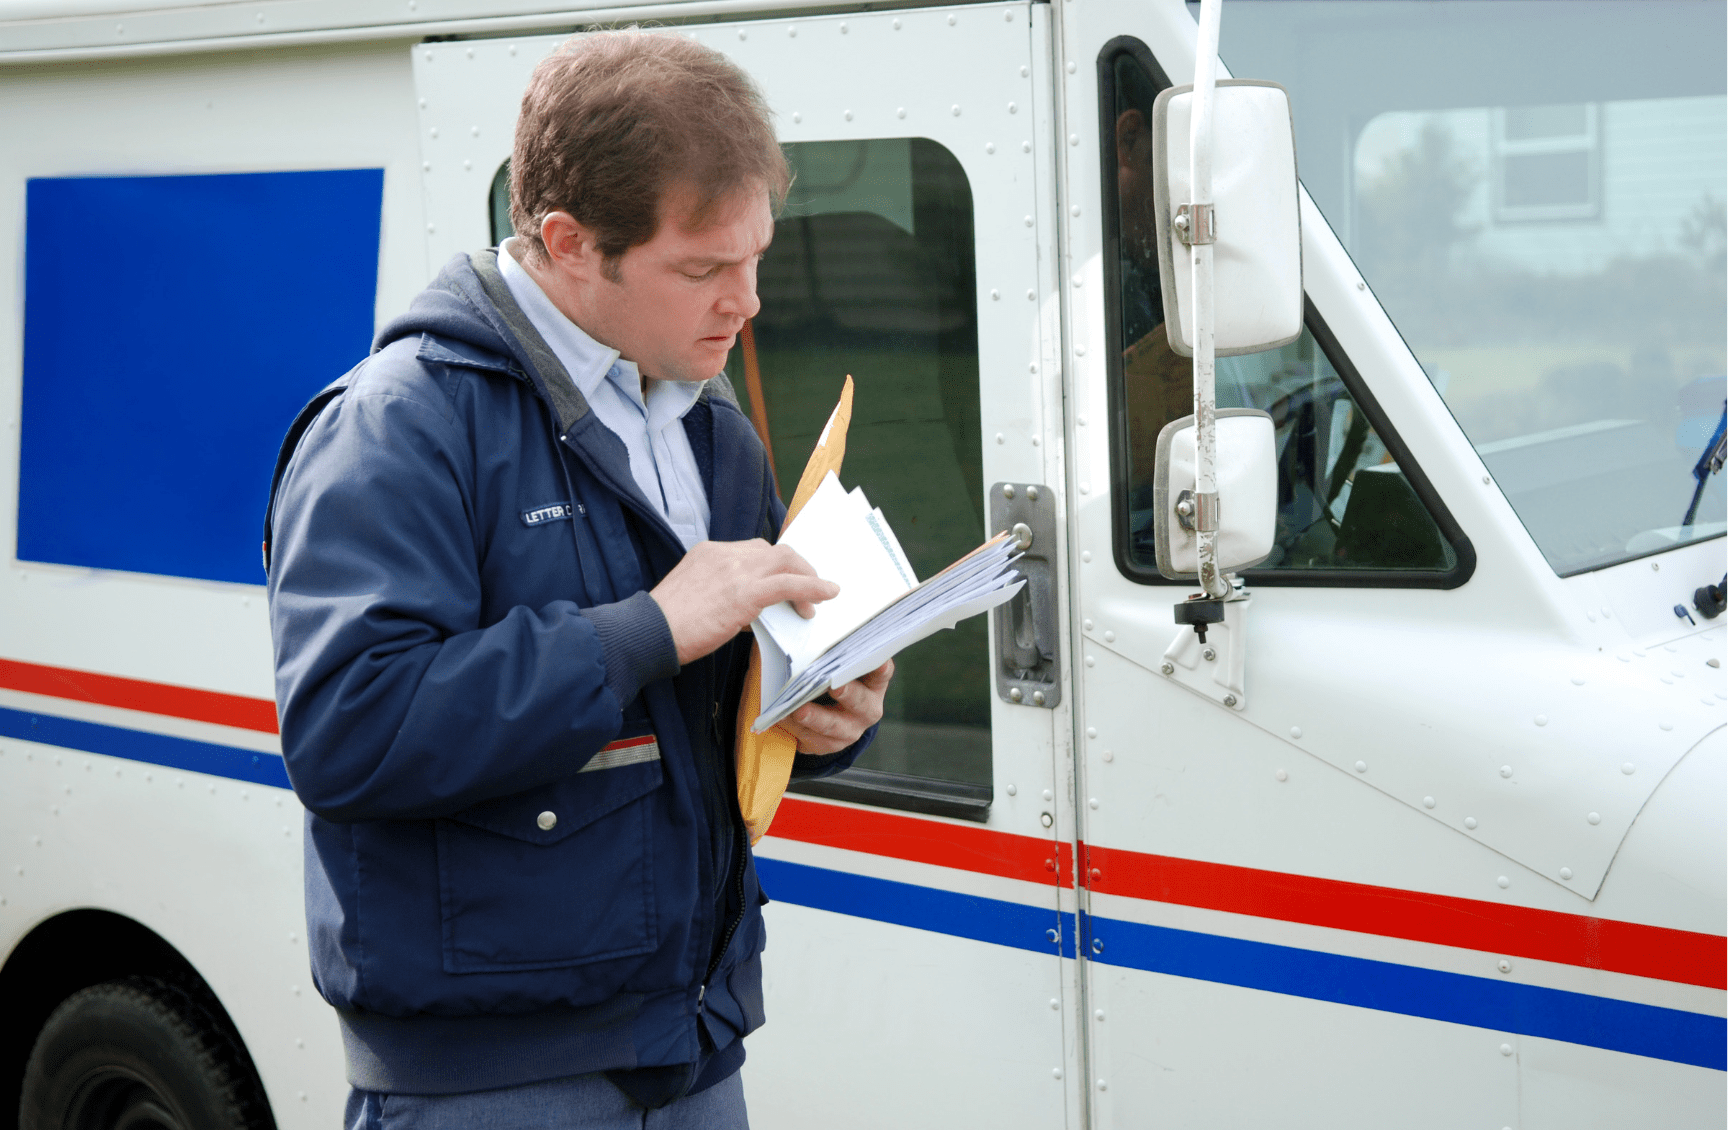 Can a Mailman Withhold Mail?